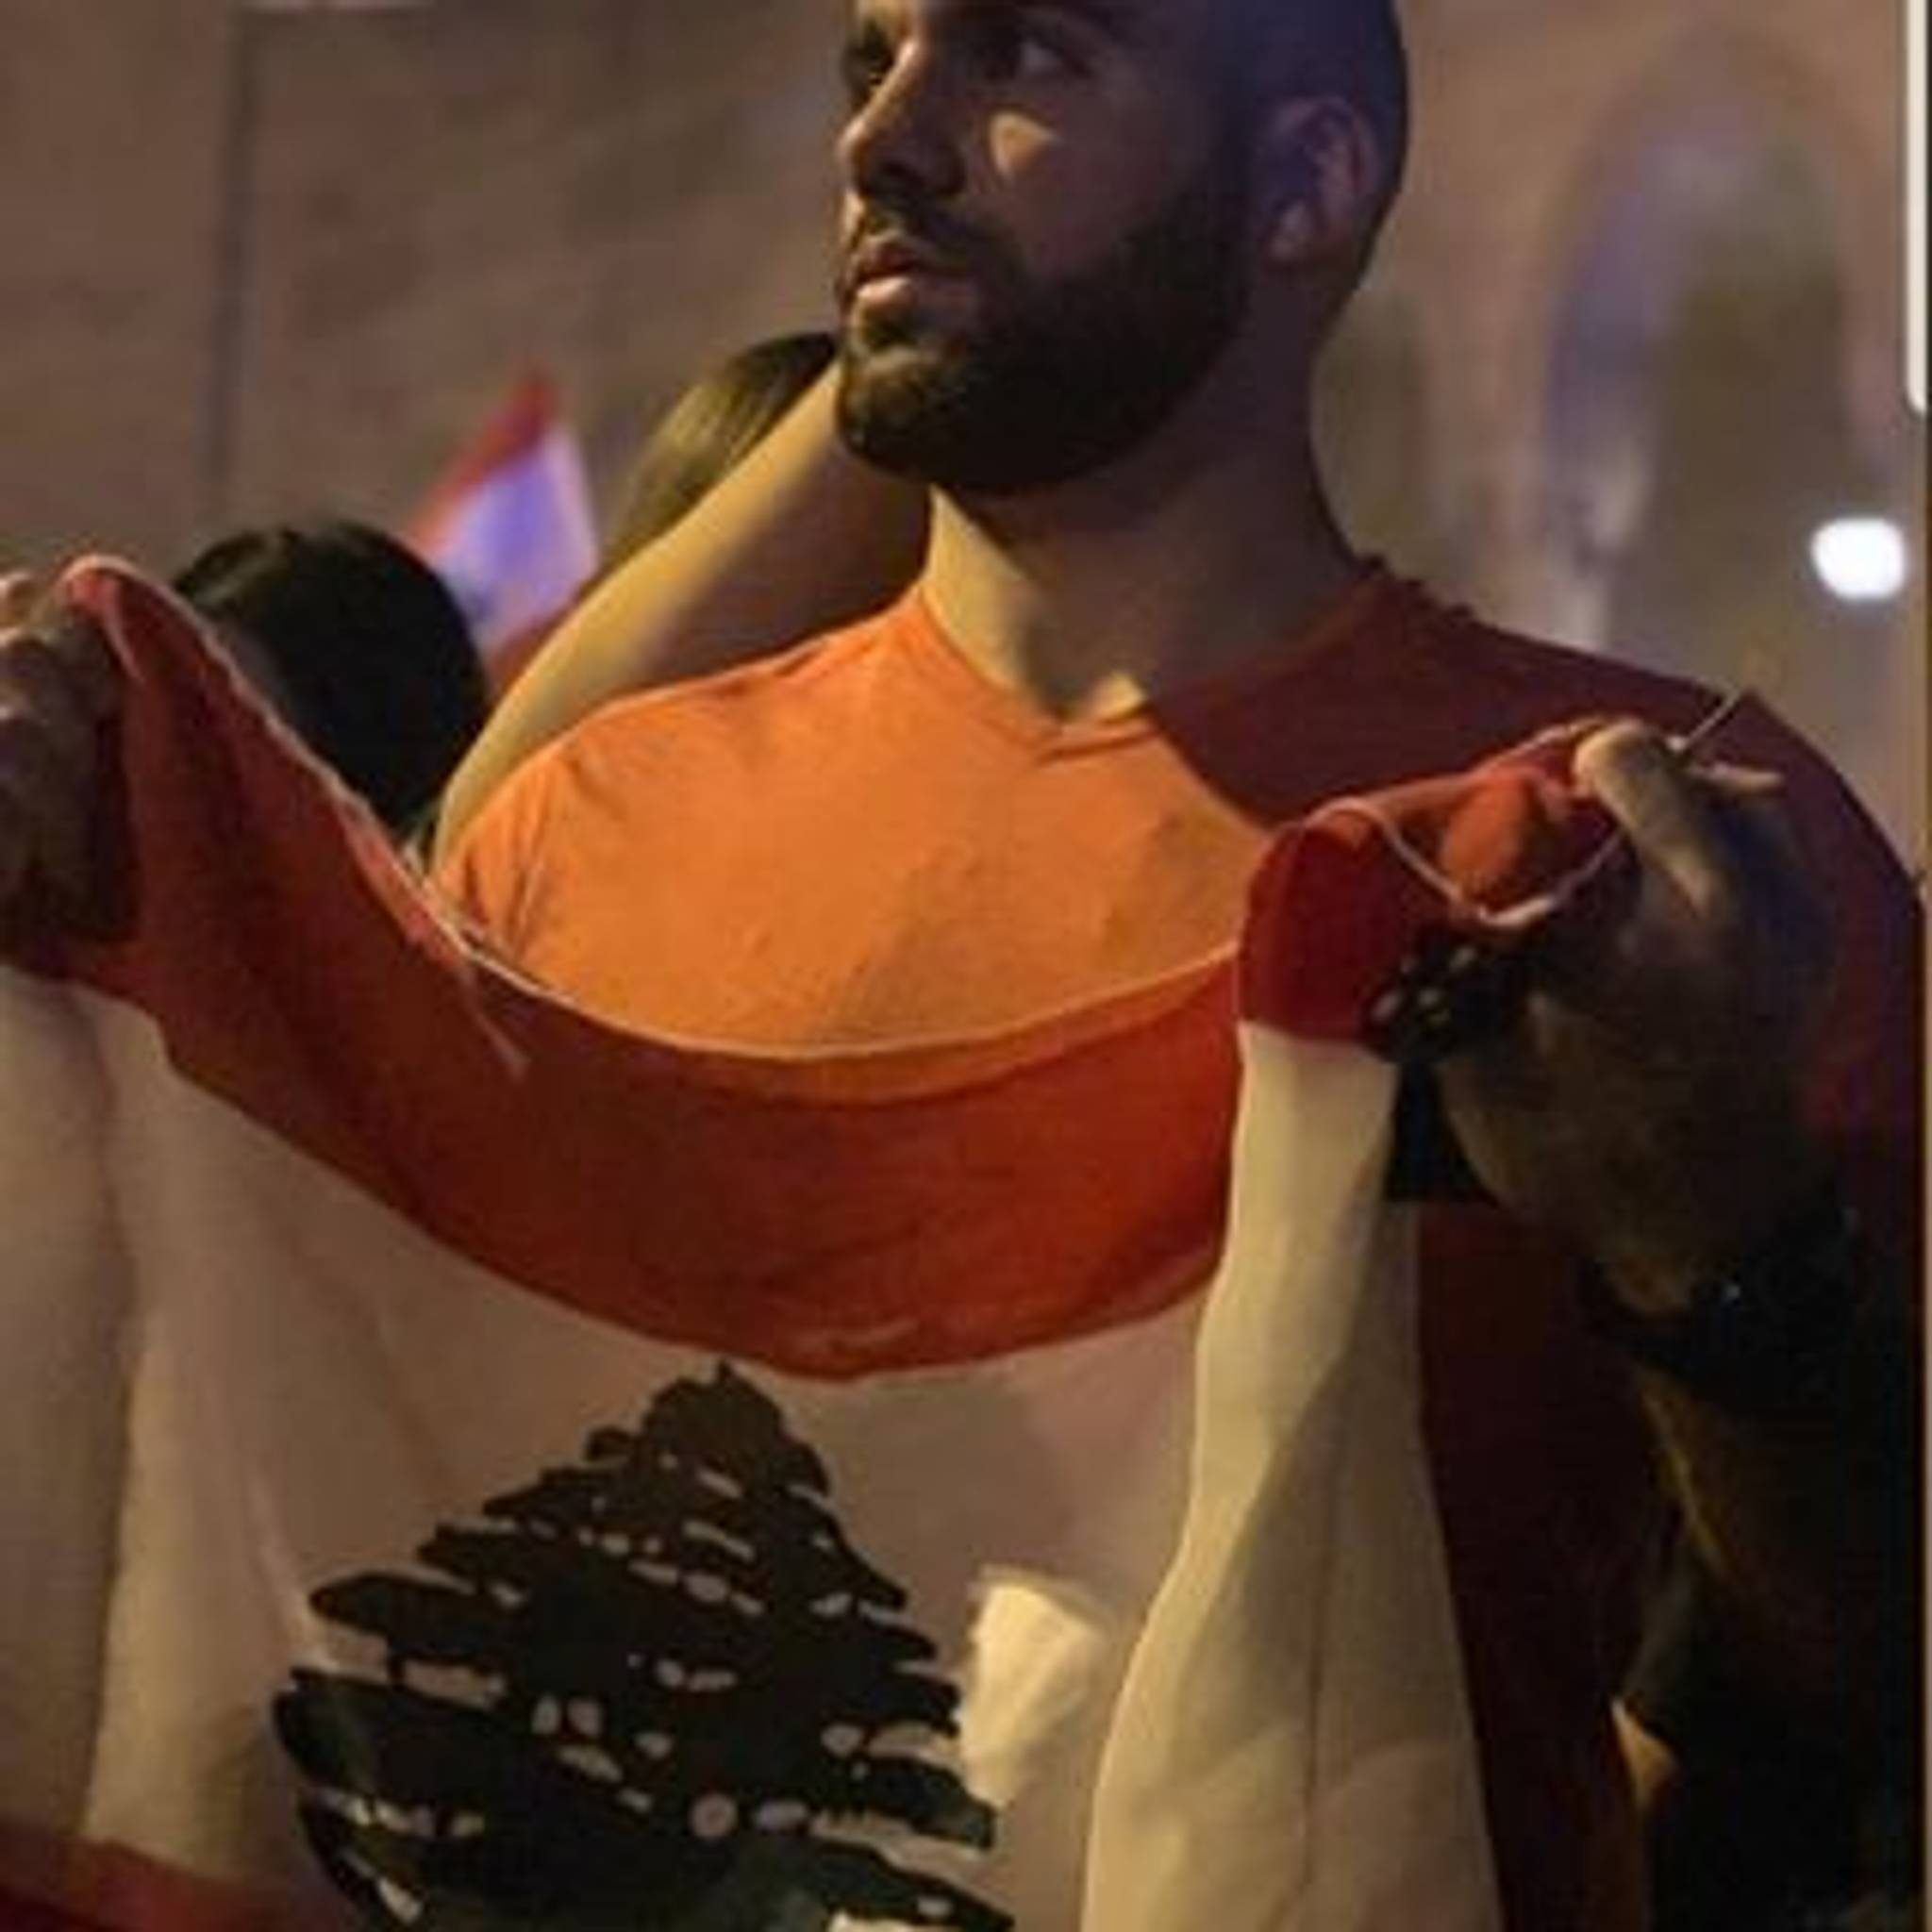 Lebanese protesters use Insta to find joy in tricky times